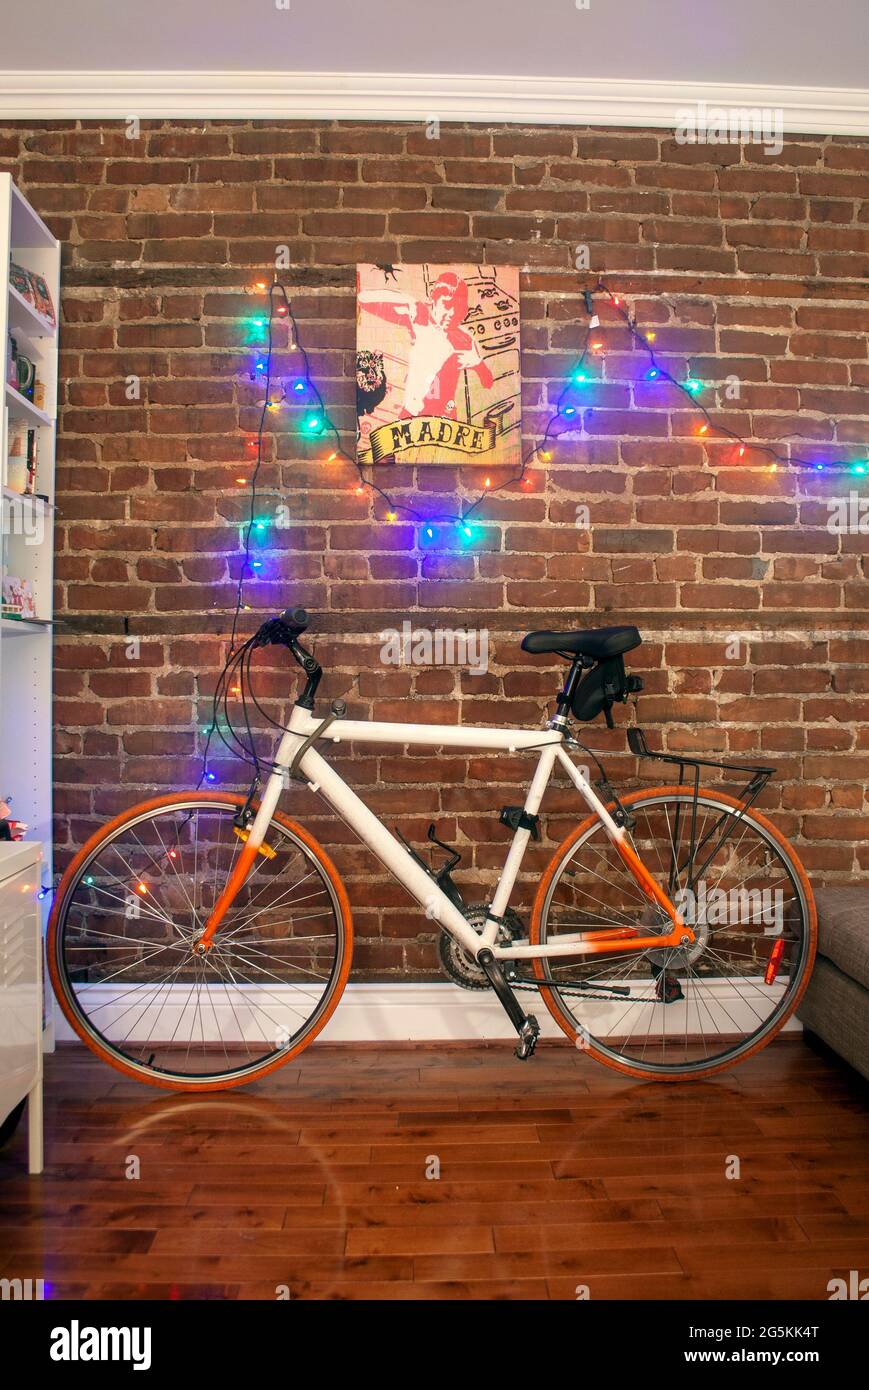 Colorful bicycle leaning against the brick wall of a room with christmas lights strung along the wall Stock Photo